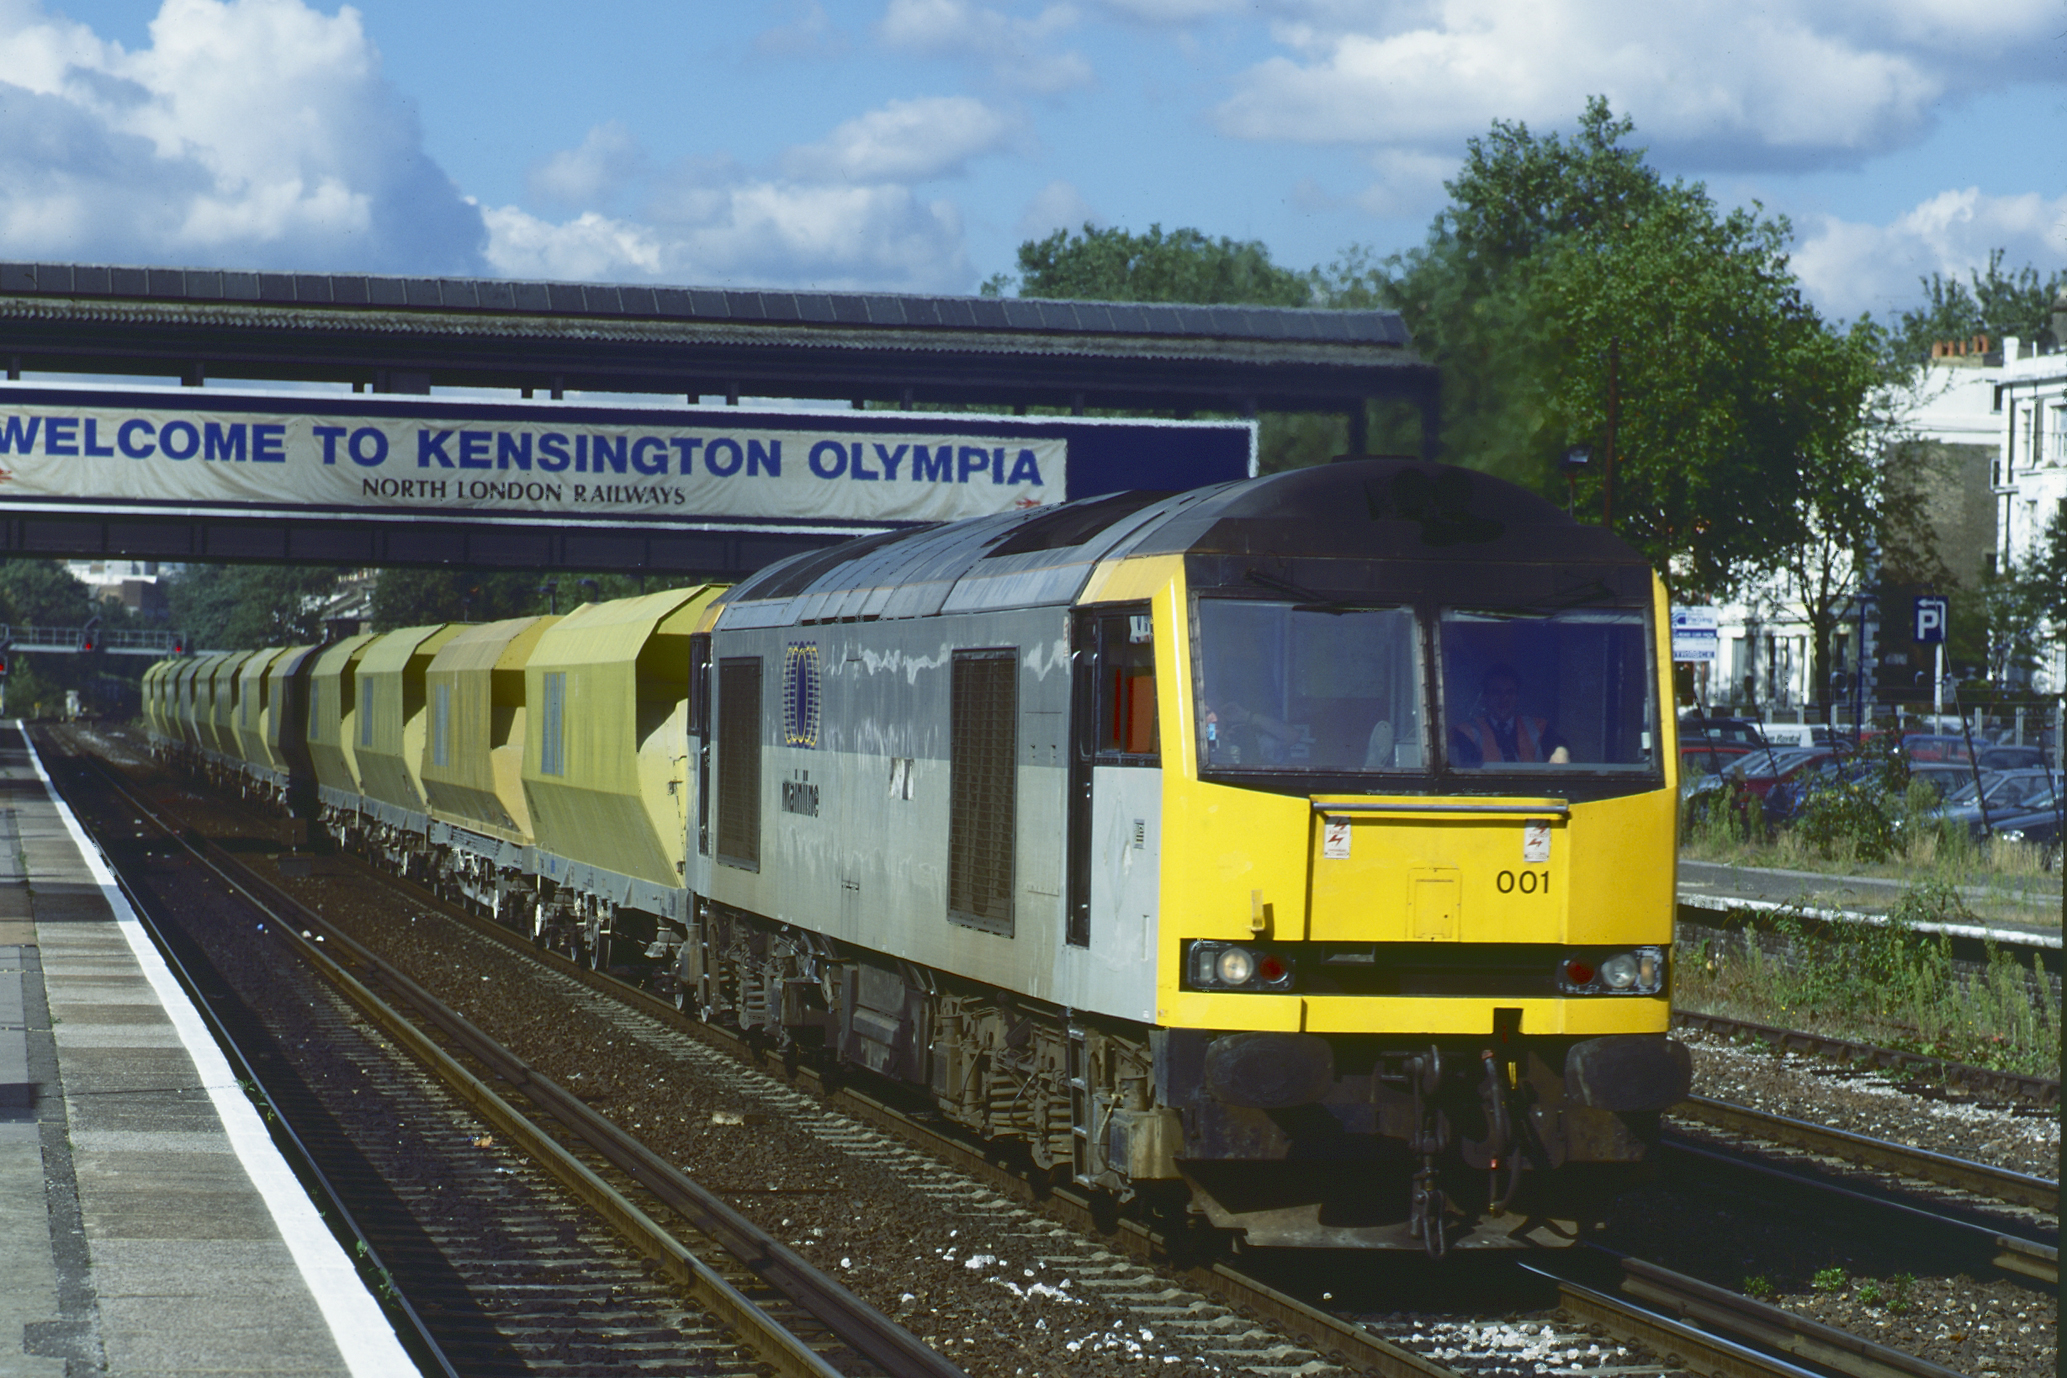 60001 passing Kensington Olympia on 2nd October 1996 with the 12.00 Acton Yard to Angerstein Wharf. Rodney Lissenden